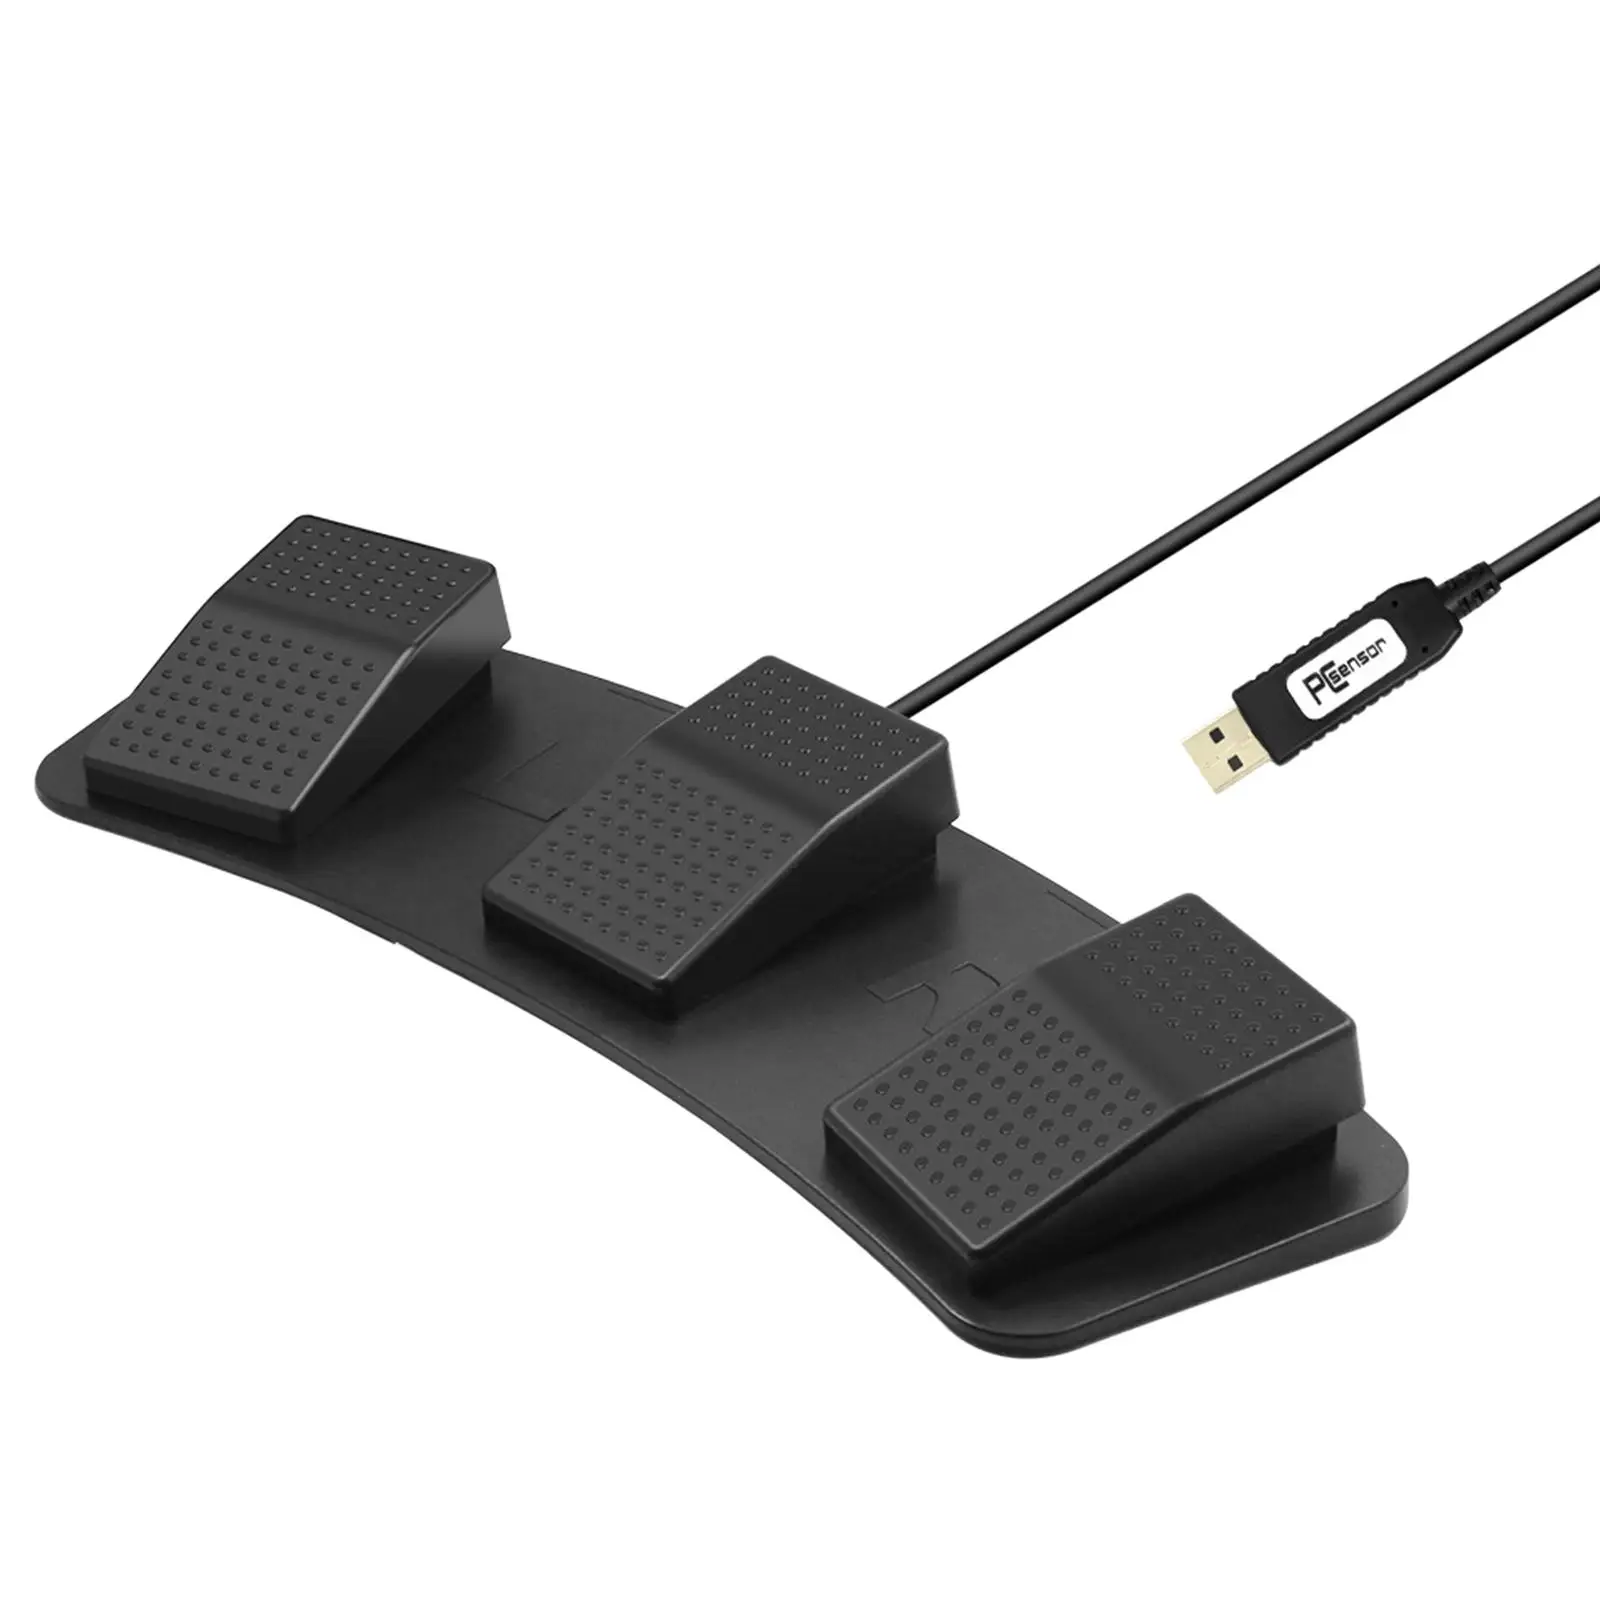 Upgraded USB Triple Foot Pedal PC Game Foot Pedal Keyboard Action Switch Pedal 3 Pedal Control Custom for Gaming Equipment Mouse